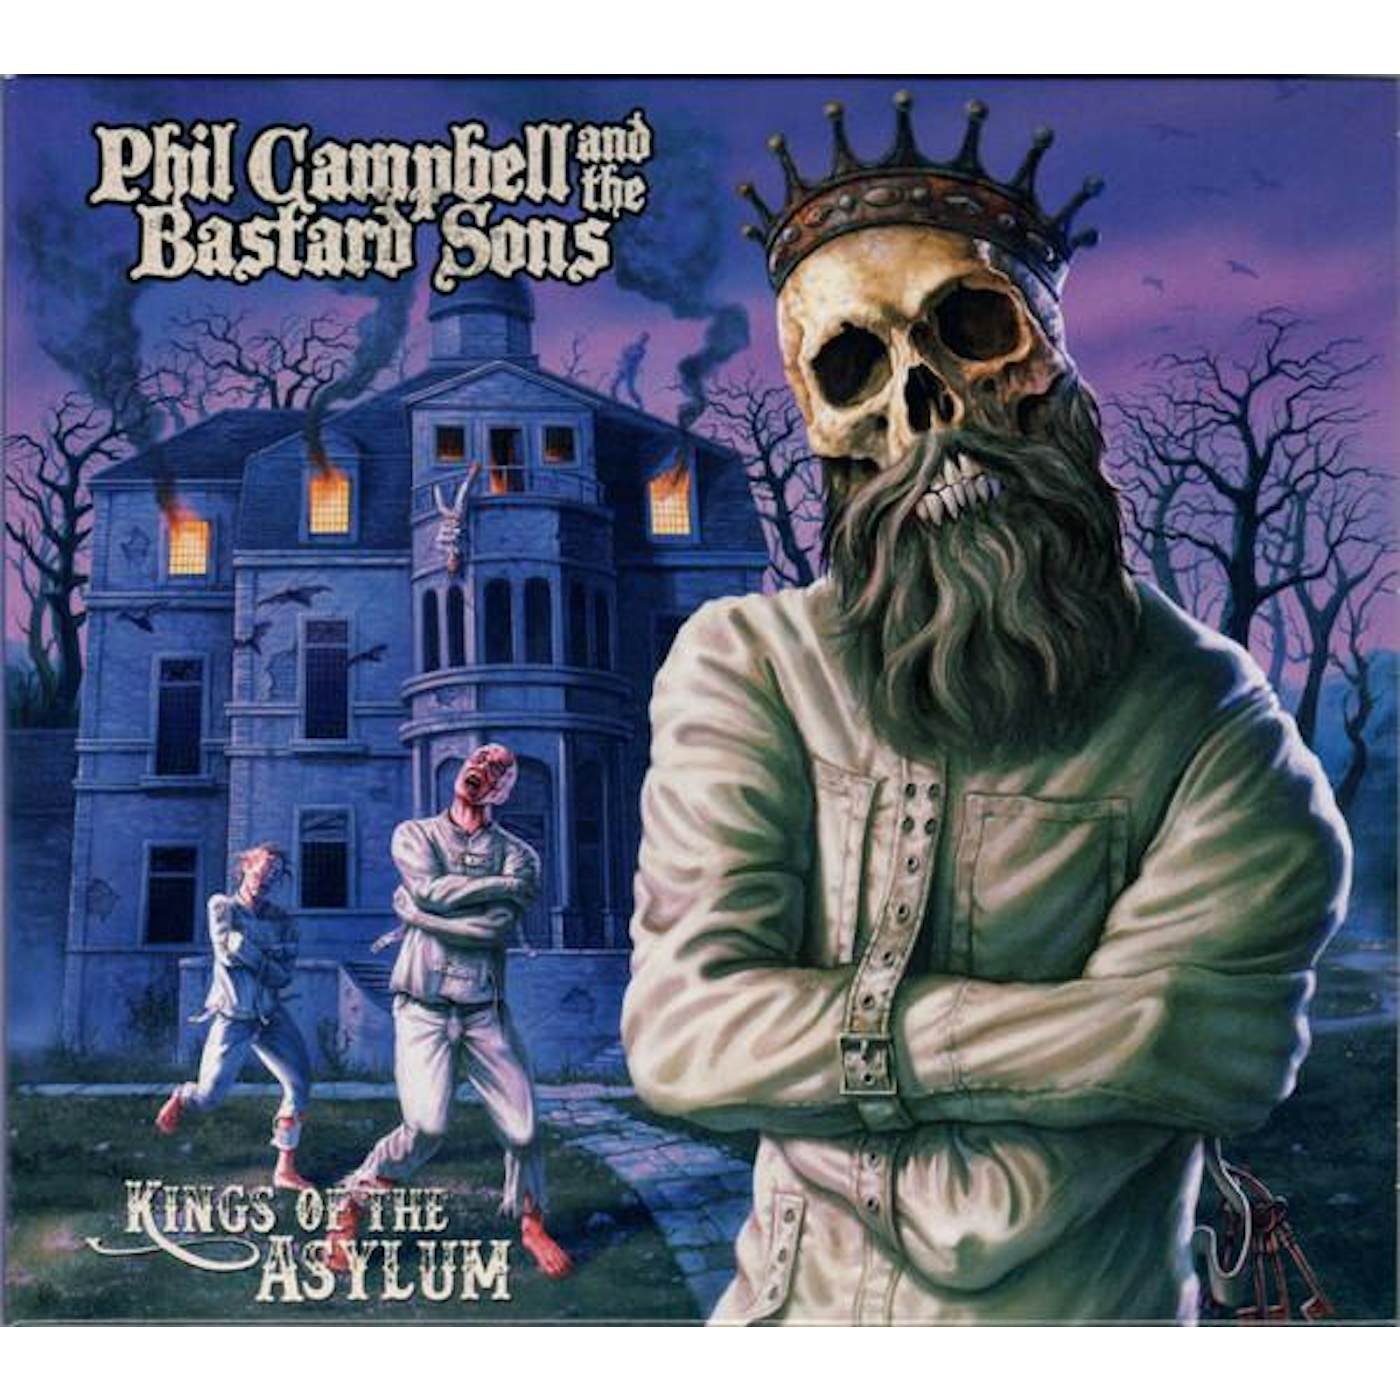 Phil Campbell and the Bastard Sons KINGS OF THE ASYLUM CD